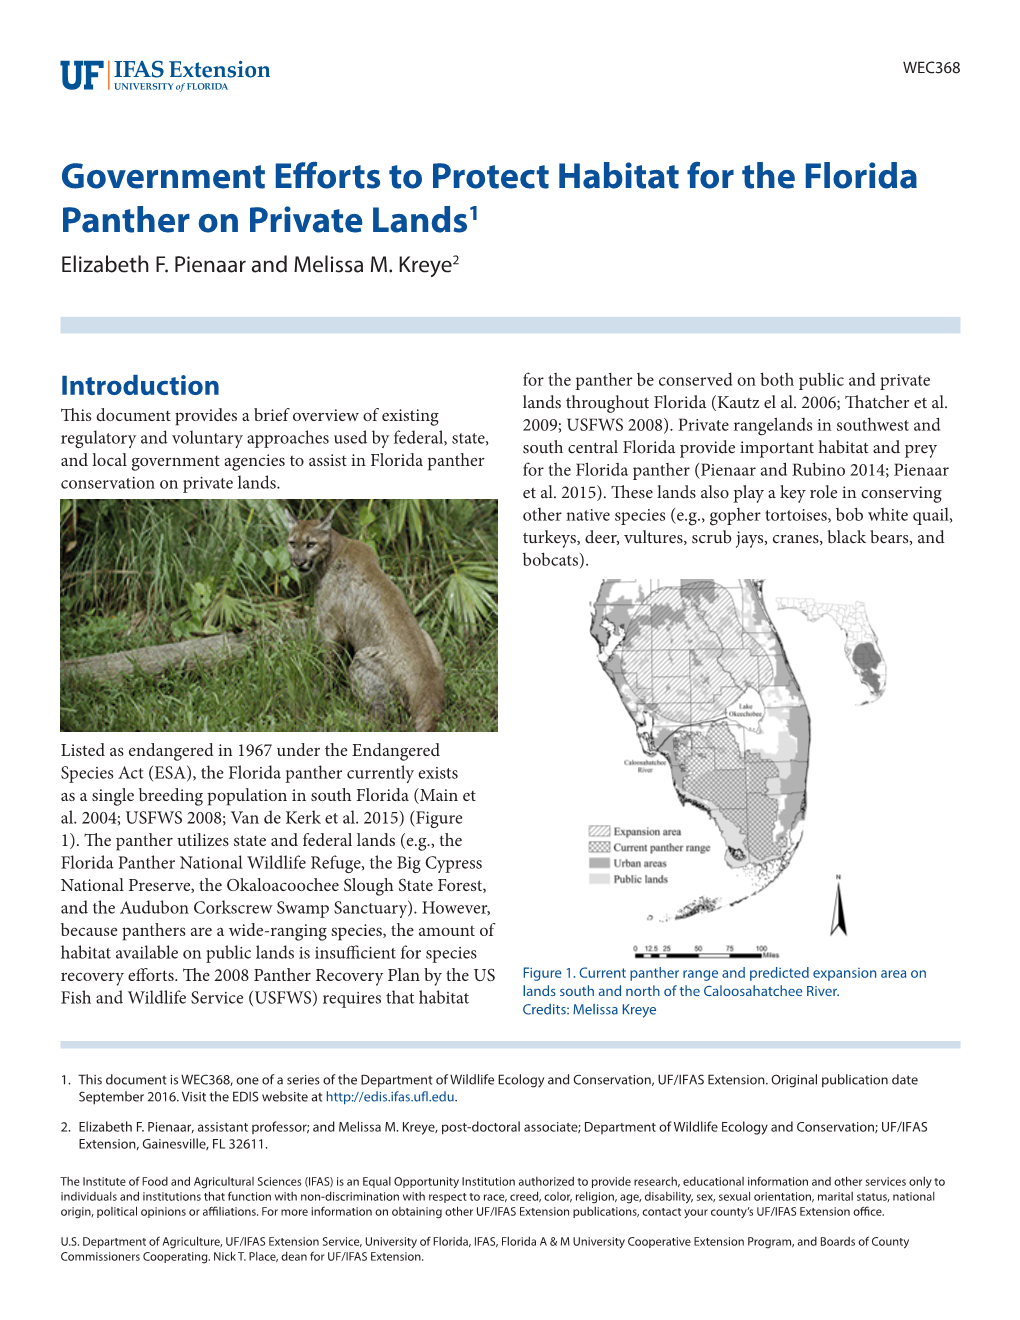 Government Efforts to Protect Habitat for the Florida Panther on Private Lands1 Elizabeth F